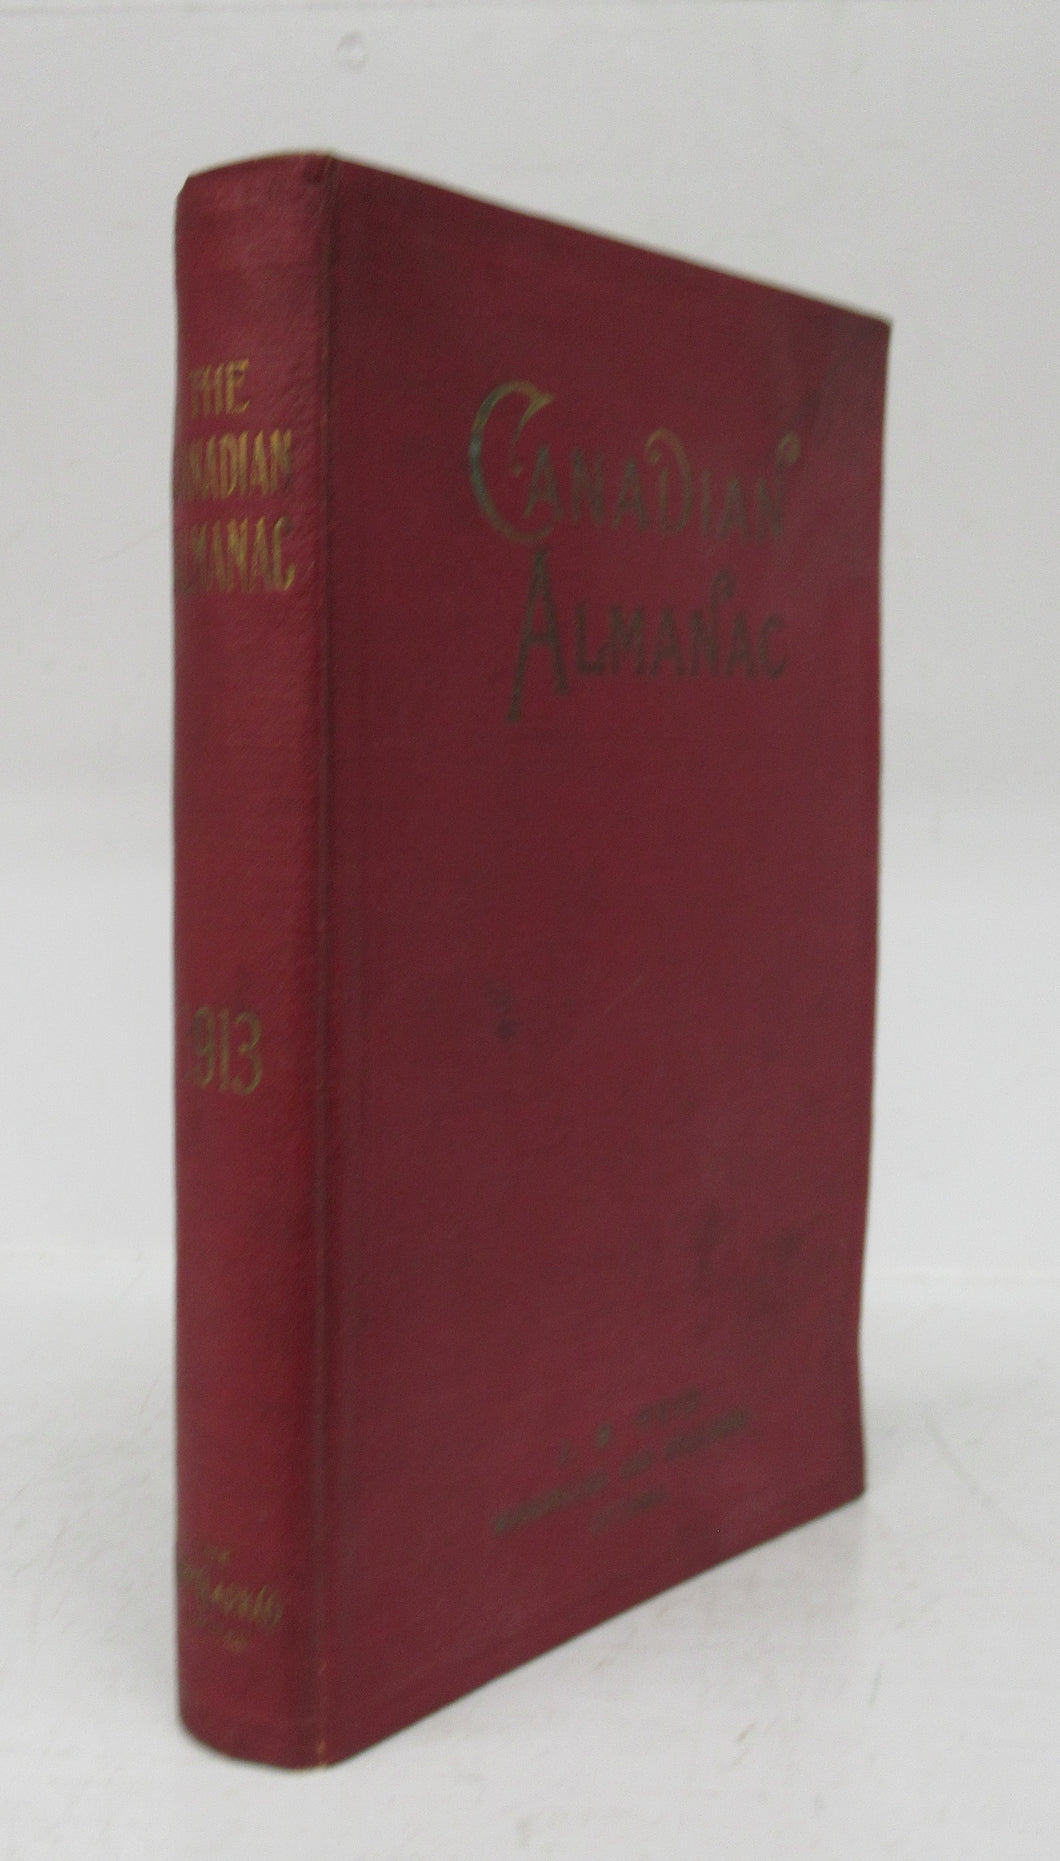 The Canadian Almanac and Miscellaneous Directory for the year 1913